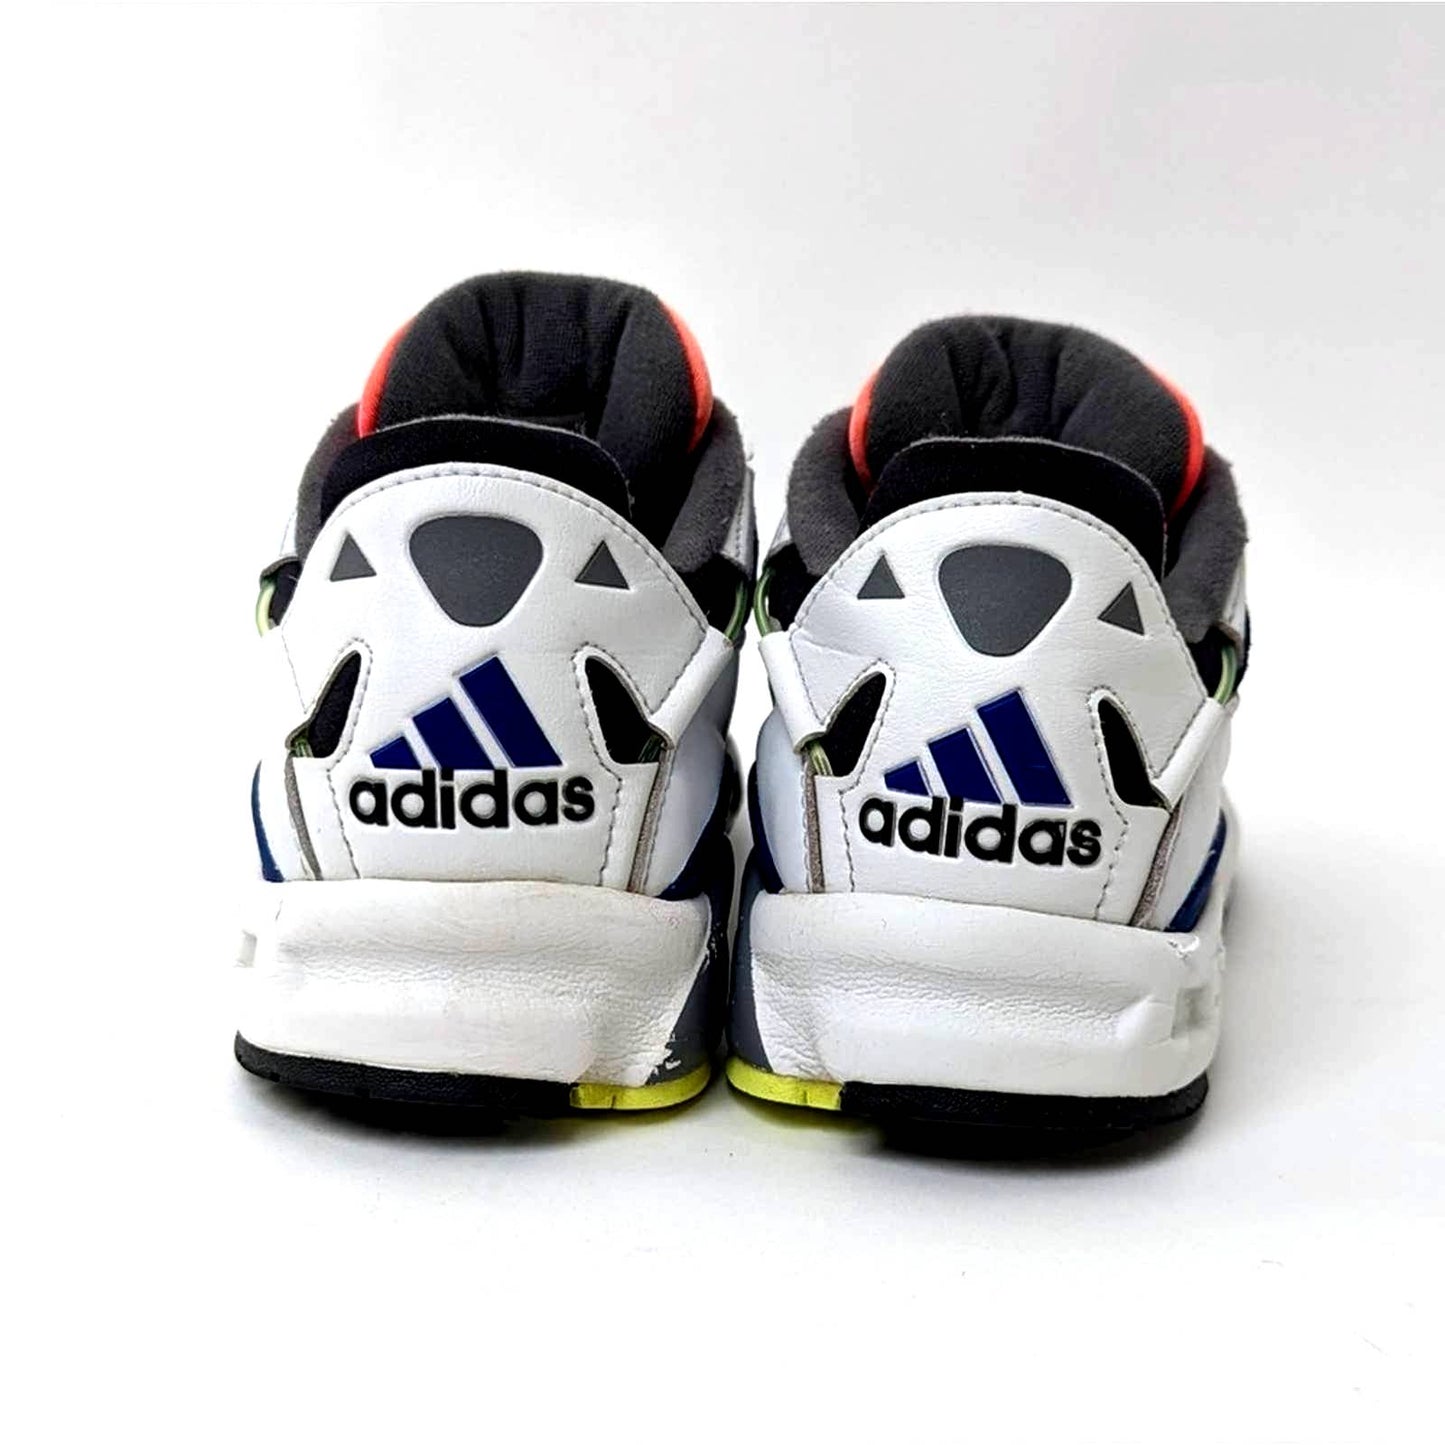 adidas Lxcon 94 Vintage Inspired Tennis Shoes - 8